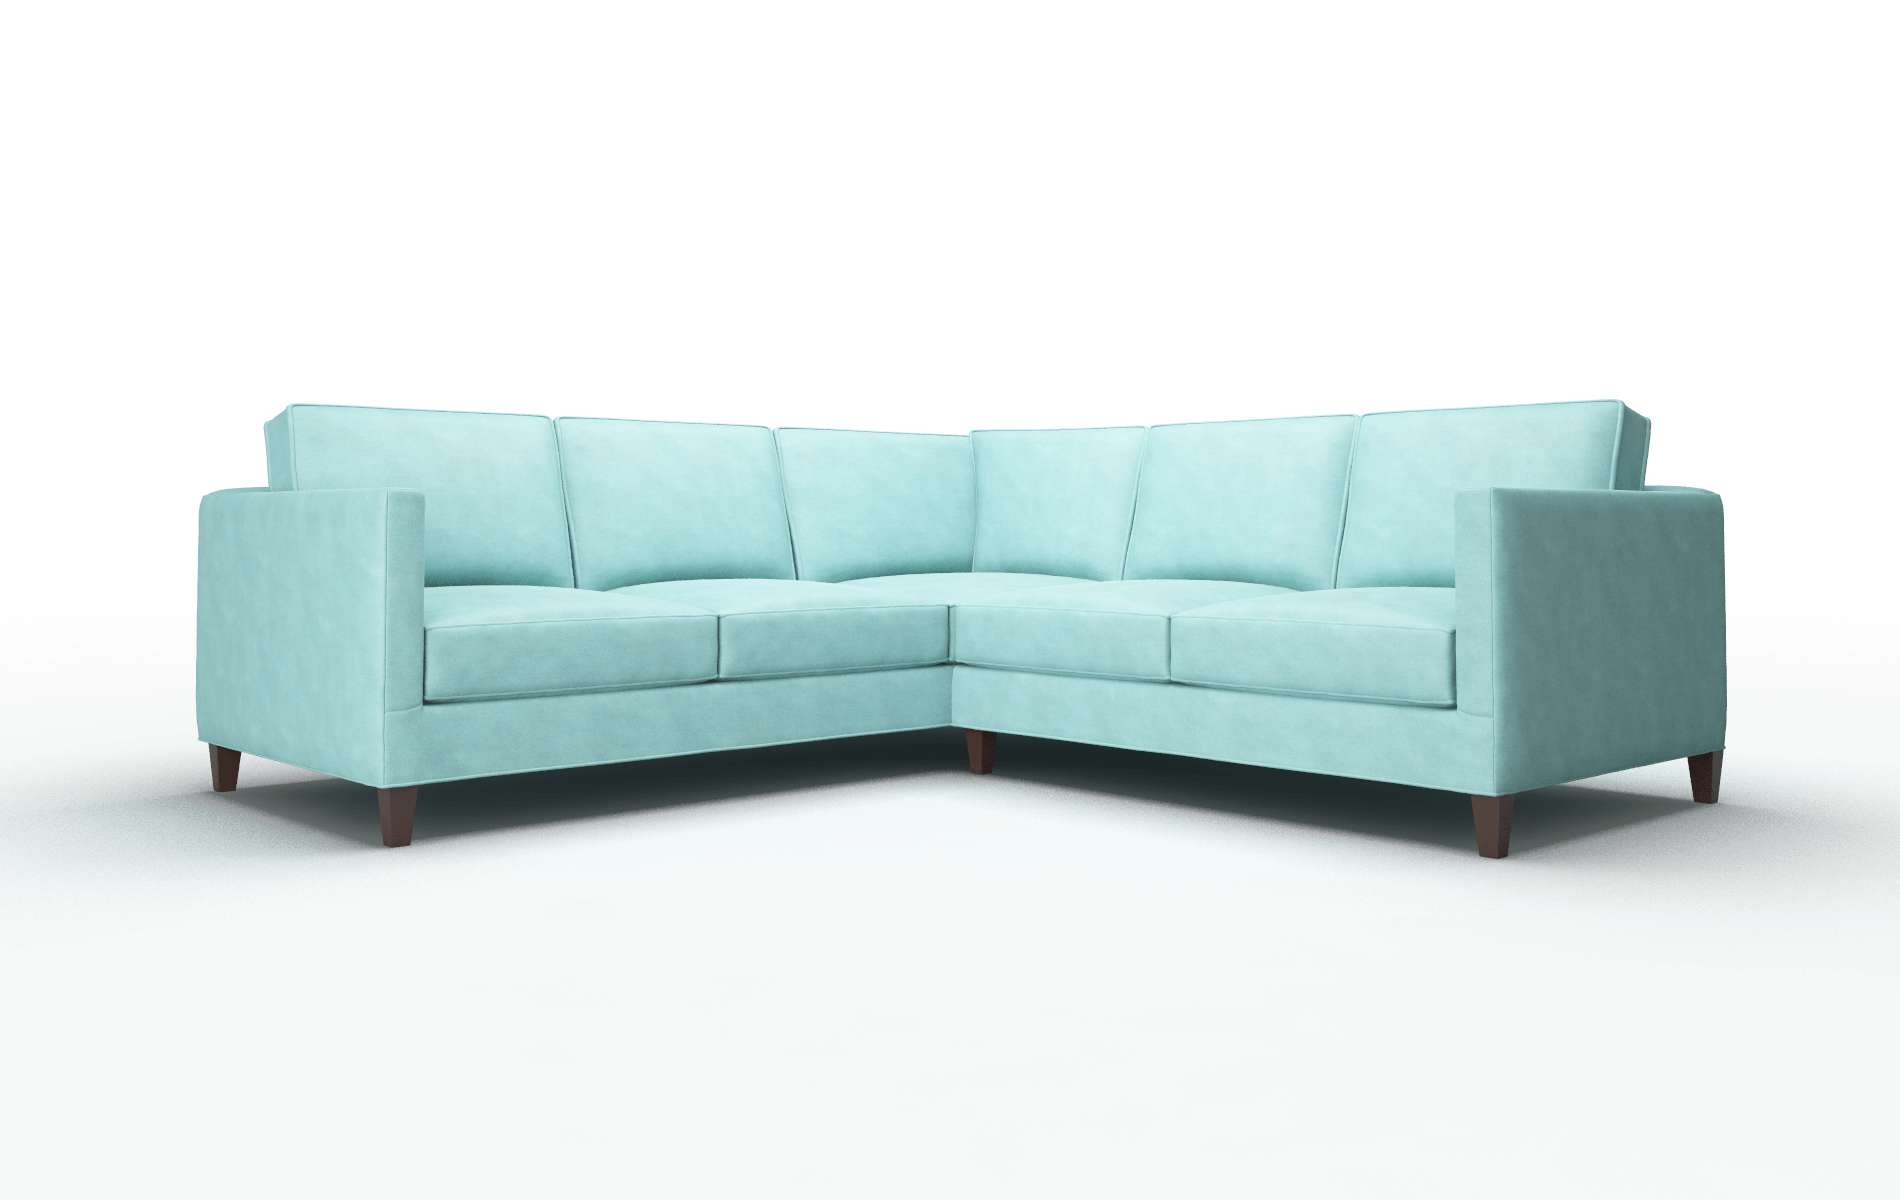 Alps Curious Turquoise chair espresso legs